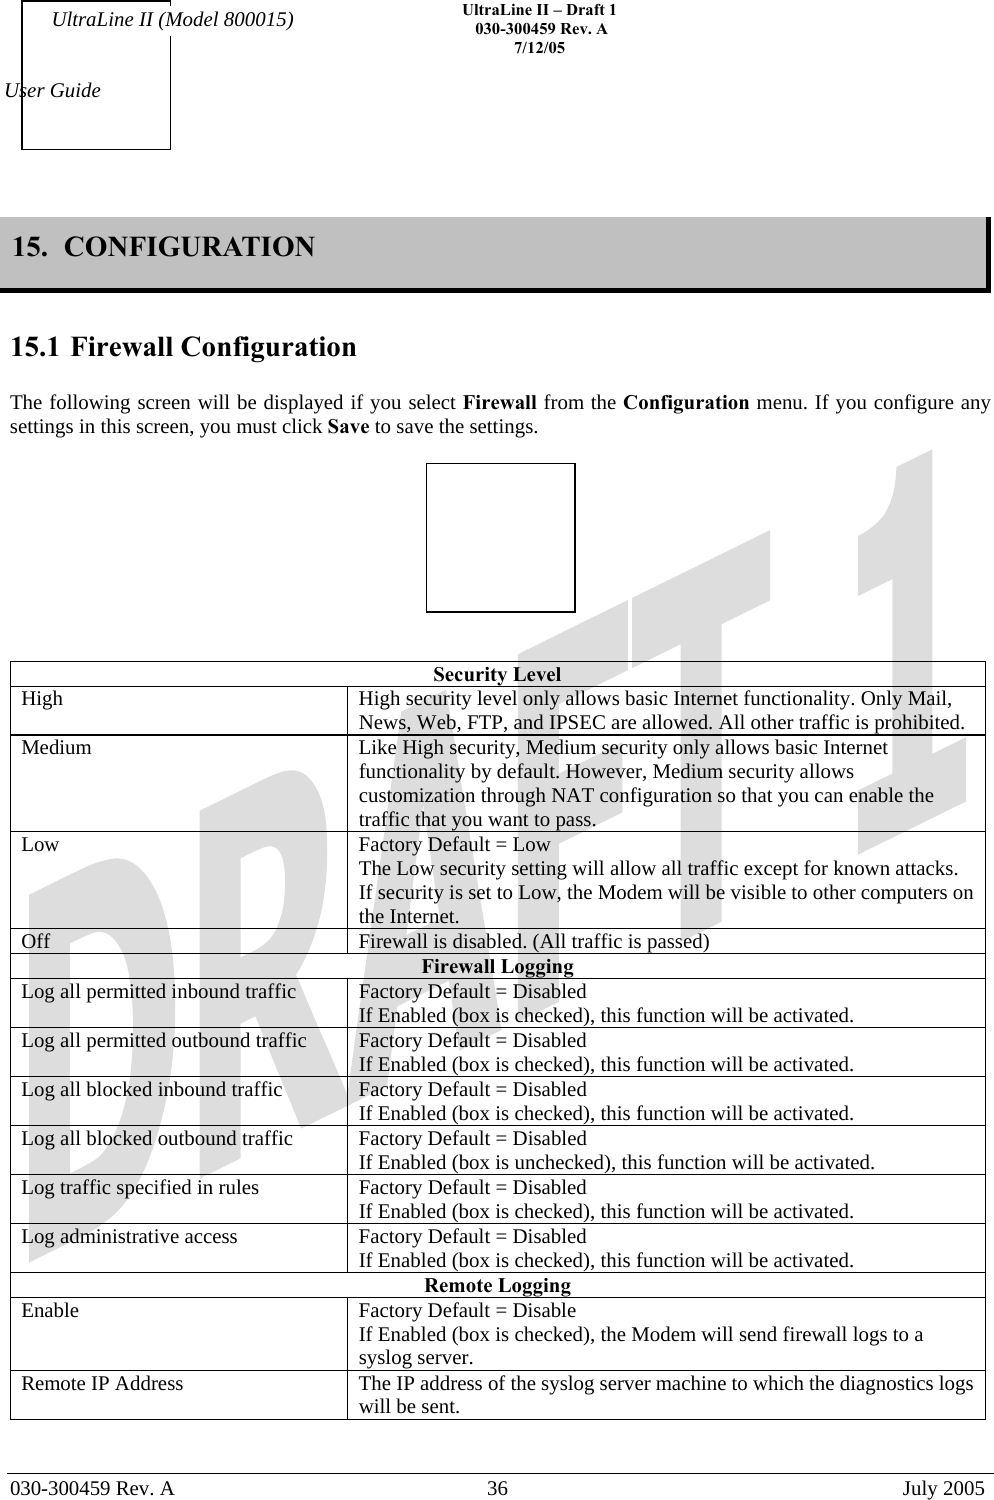    UltraLine II – Draft 1   030-300459 Rev. A 7/12/05   030-300459 Rev. A  36  July 2005  User Guide UltraLine II (Model 800015) 15.  CONFIGURATION  15.1 Firewall Configuration  The following screen will be displayed if you select Firewall from the Configuration menu. If you configure any settings in this screen, you must click Save to save the settings.     Security Level High  High security level only allows basic Internet functionality. Only Mail, News, Web, FTP, and IPSEC are allowed. All other traffic is prohibited. Medium  Like High security, Medium security only allows basic Internet functionality by default. However, Medium security allows customization through NAT configuration so that you can enable the traffic that you want to pass. Low  Factory Default = Low The Low security setting will allow all traffic except for known attacks. If security is set to Low, the Modem will be visible to other computers on the Internet. Off  Firewall is disabled. (All traffic is passed)  Firewall Logging Log all permitted inbound traffic  Factory Default = Disabled If Enabled (box is checked), this function will be activated. Log all permitted outbound traffic  Factory Default = Disabled If Enabled (box is checked), this function will be activated. Log all blocked inbound traffic  Factory Default = Disabled If Enabled (box is checked), this function will be activated. Log all blocked outbound traffic  Factory Default = Disabled If Enabled (box is unchecked), this function will be activated. Log traffic specified in rules  Factory Default = Disabled If Enabled (box is checked), this function will be activated. Log administrative access  Factory Default = Disabled If Enabled (box is checked), this function will be activated. Remote Logging Enable  Factory Default = Disable If Enabled (box is checked), the Modem will send firewall logs to a syslog server. Remote IP Address  The IP address of the syslog server machine to which the diagnostics logs will be sent.   